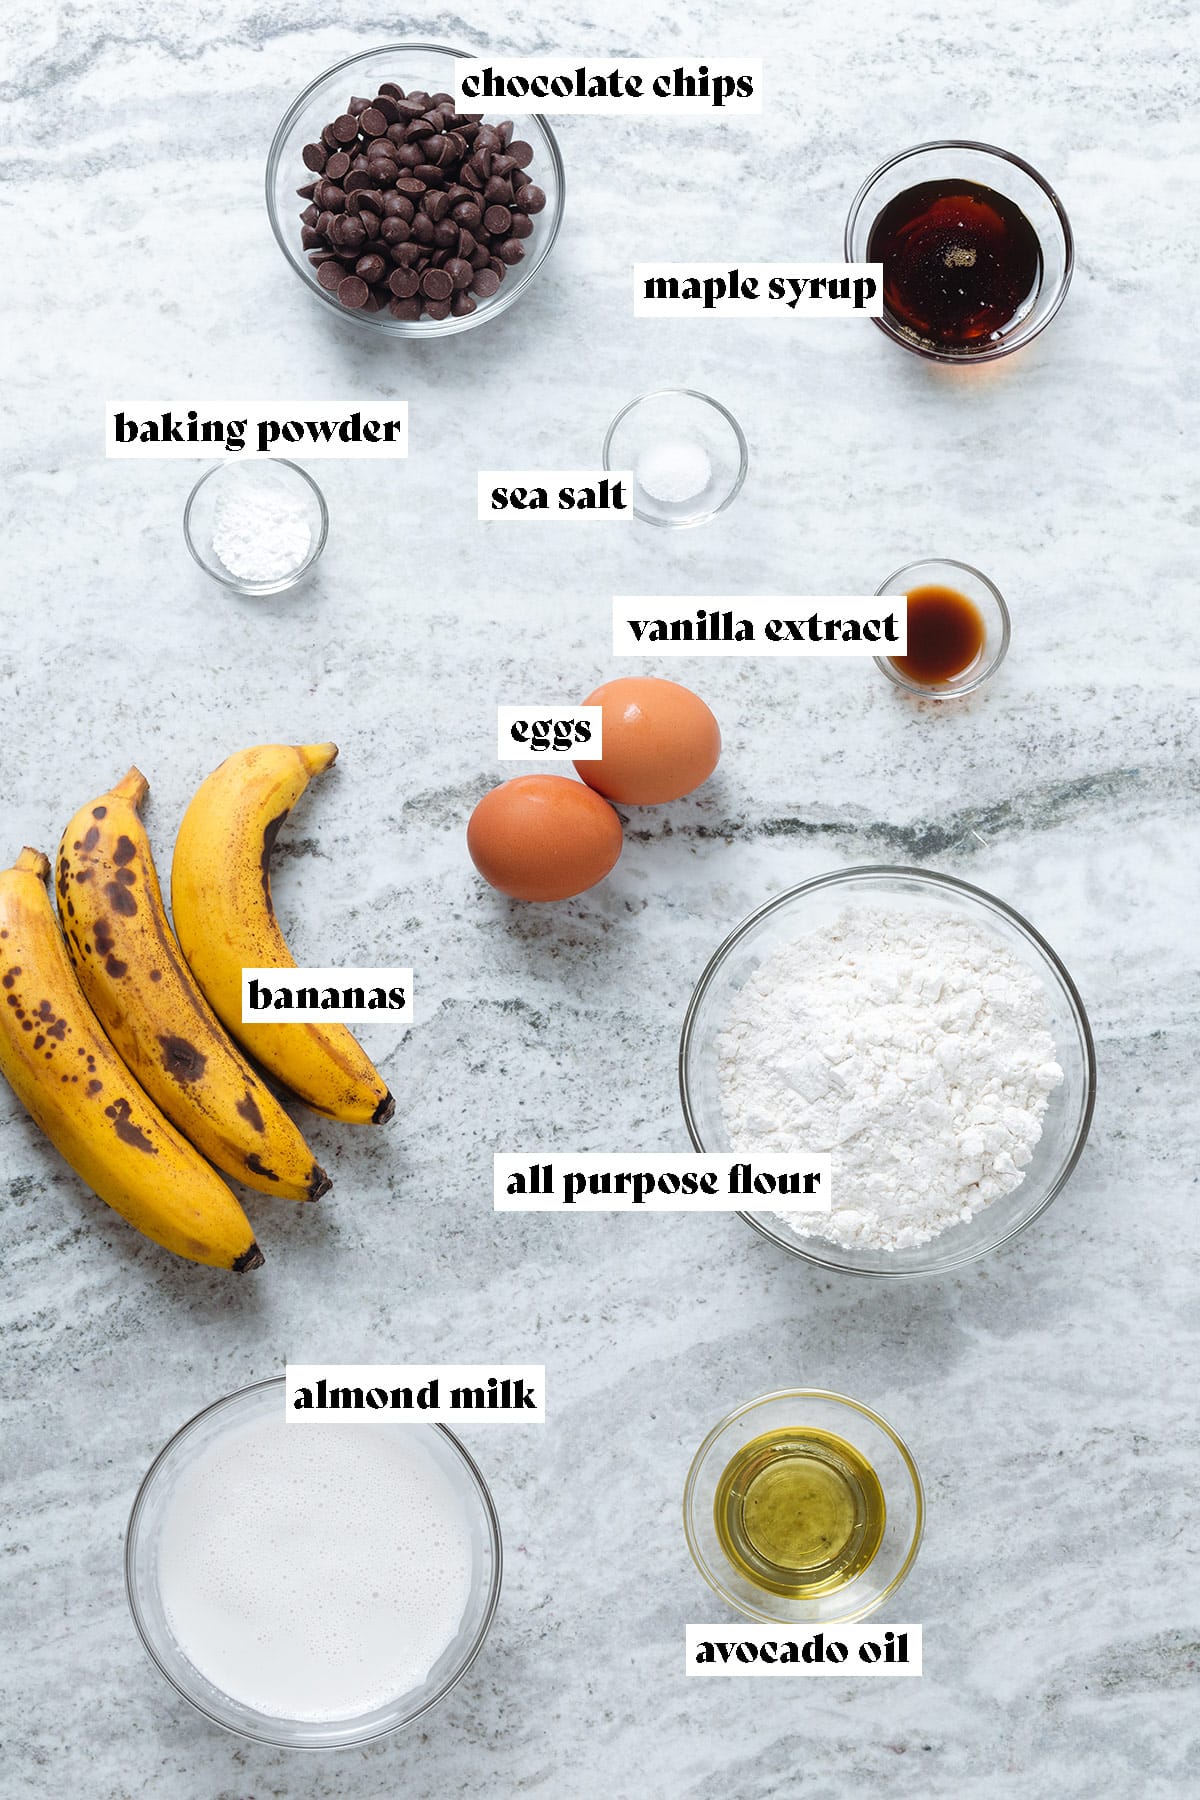 Ingredients for banana chocolate chip pancakes like bananas, flour, milk, eggs, and vanilla extract laid out on a grey stone background with text overlay.